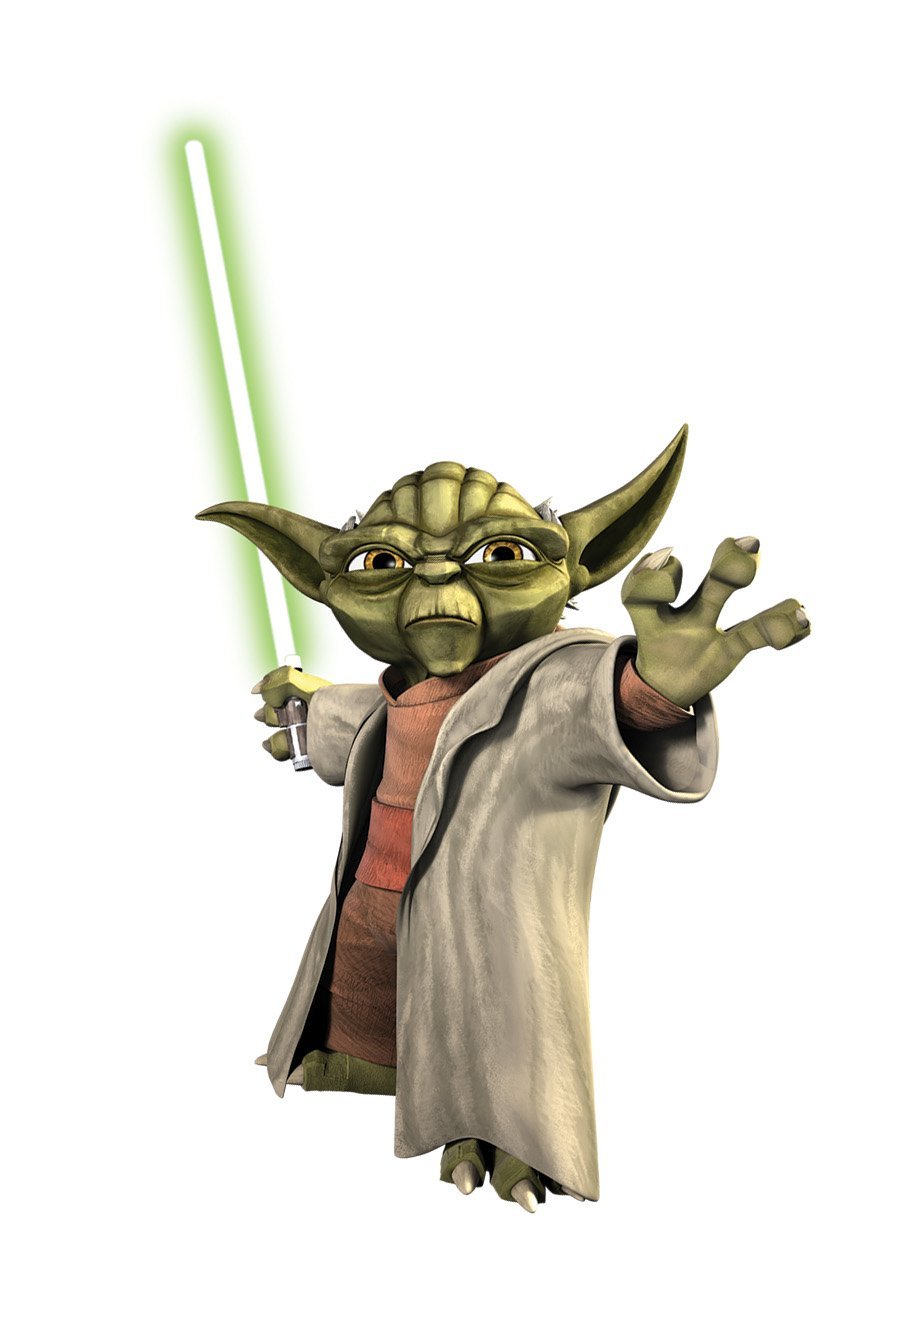 Yoda (as of The Clone Wars)